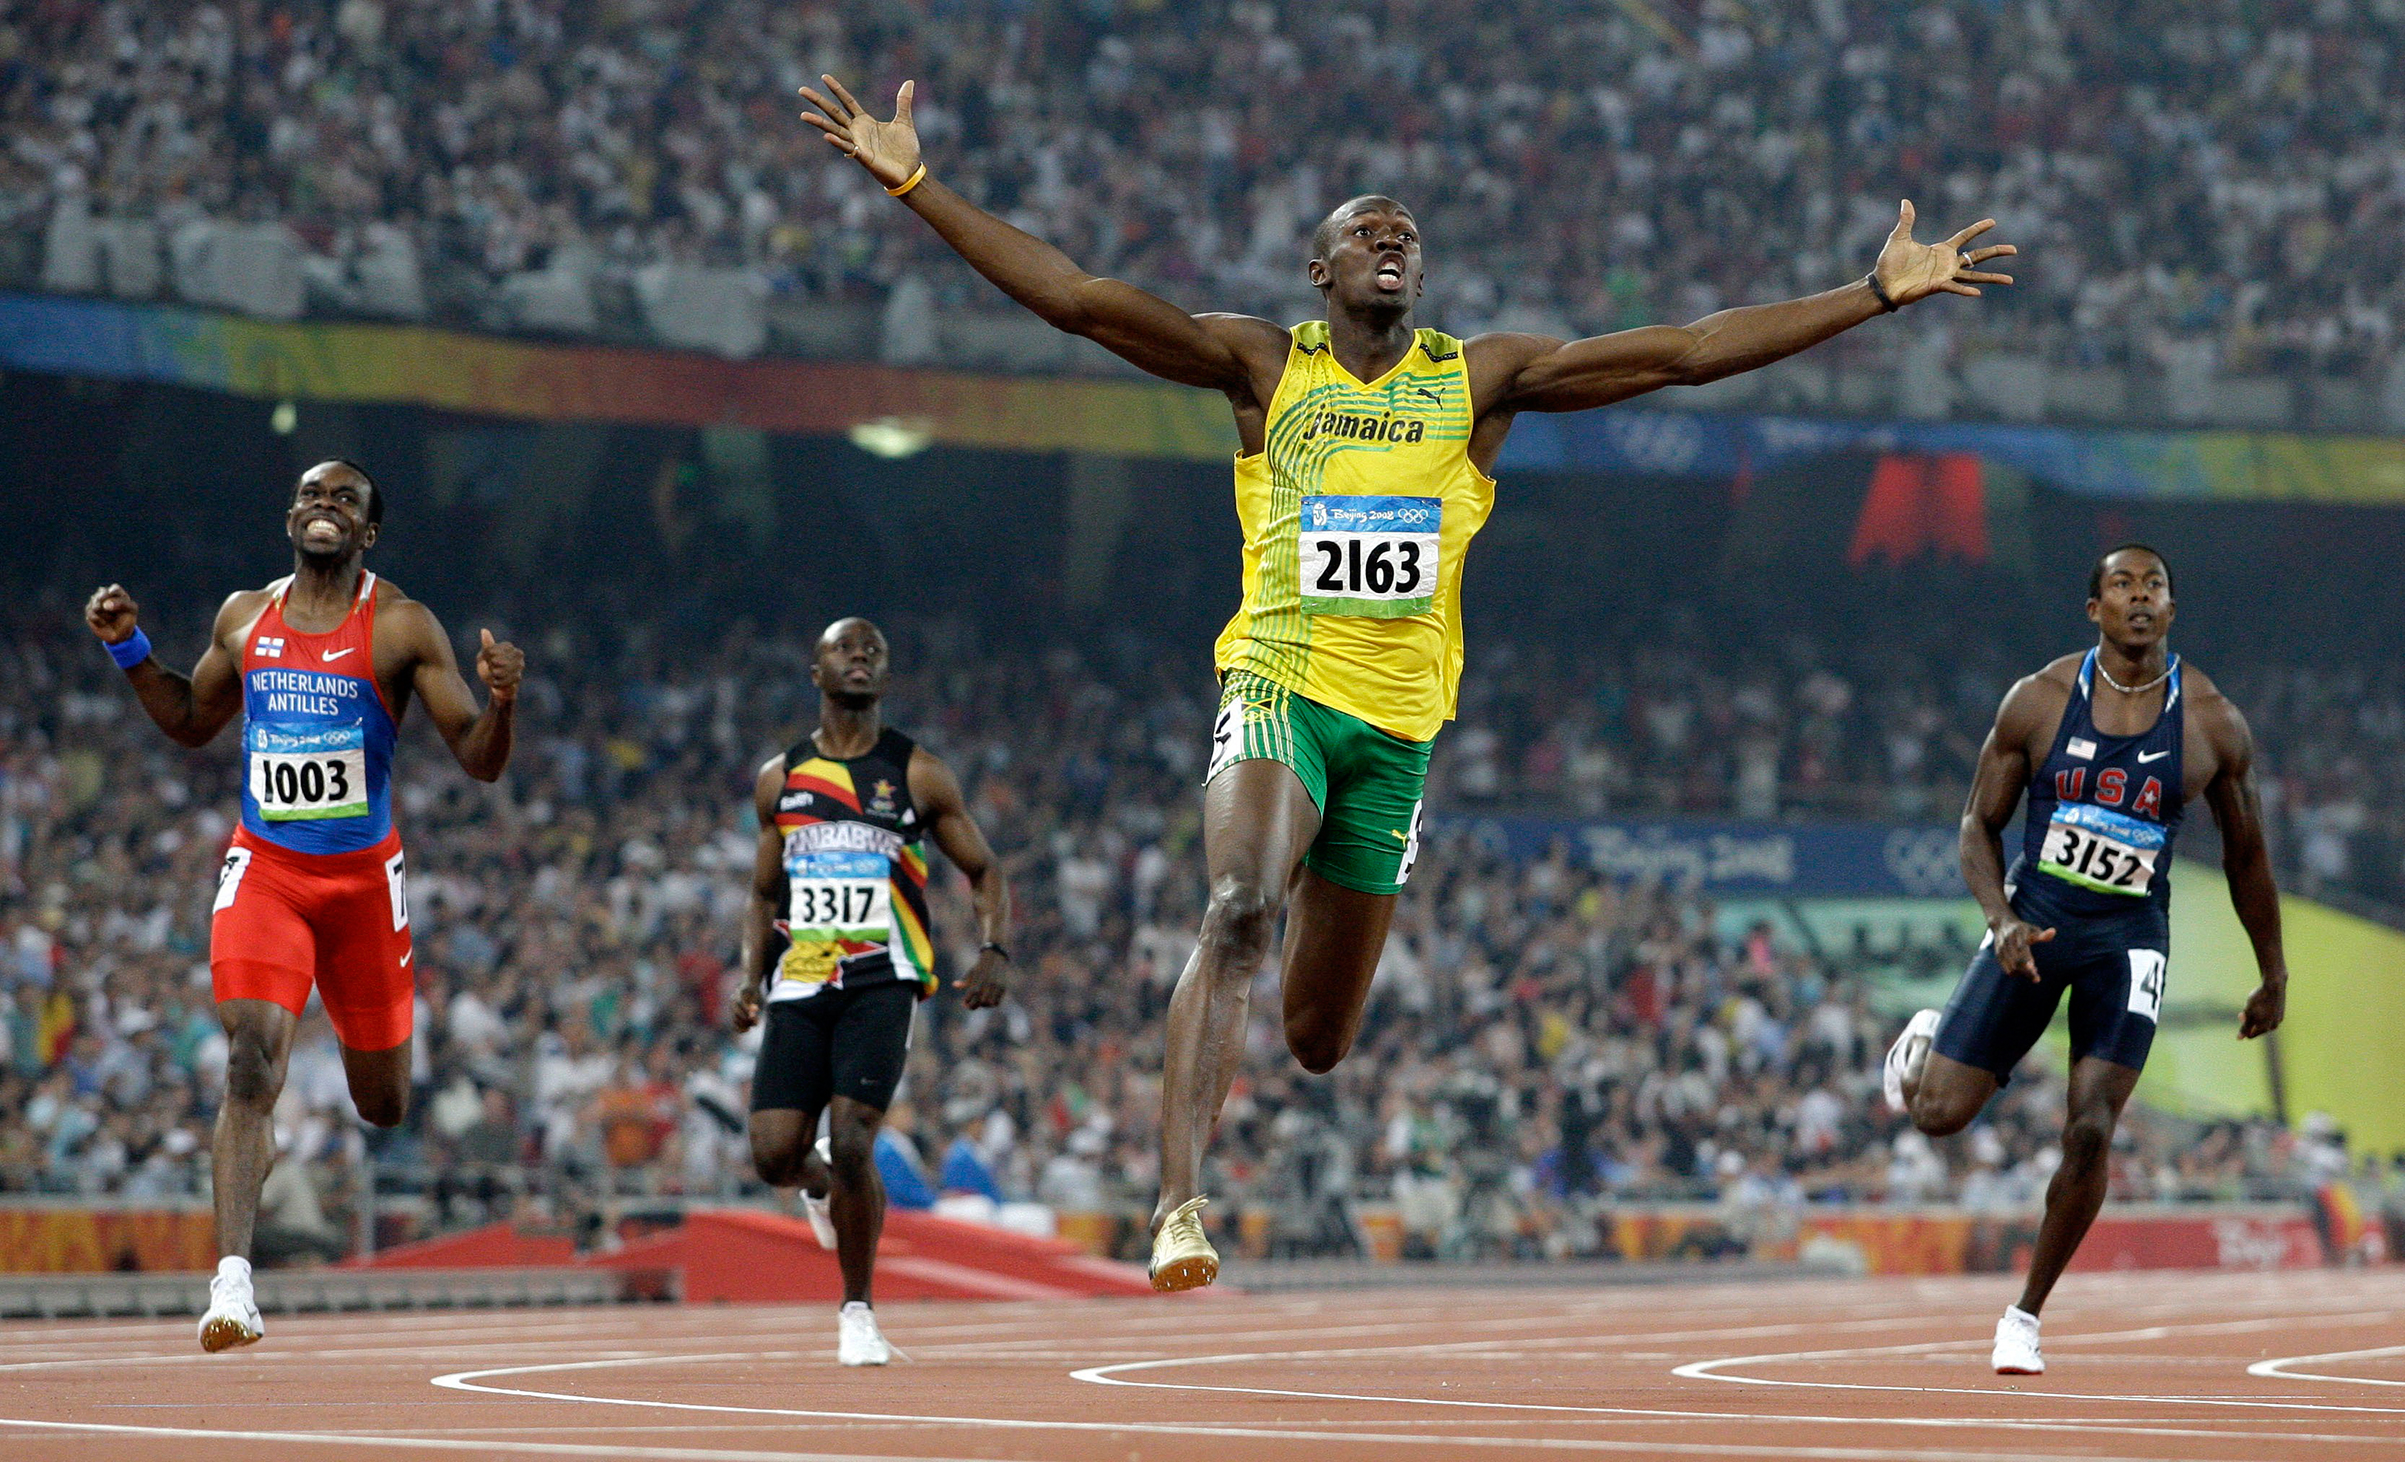 Jamaica's Usain Bolt crosses the finish line to win the gold in the men's 200-meter final during the athletics competitions in the National Stadium at the Beijing 2008 Olympics, Aug. 20, 2008. (Anja Niedringhaus—AP)